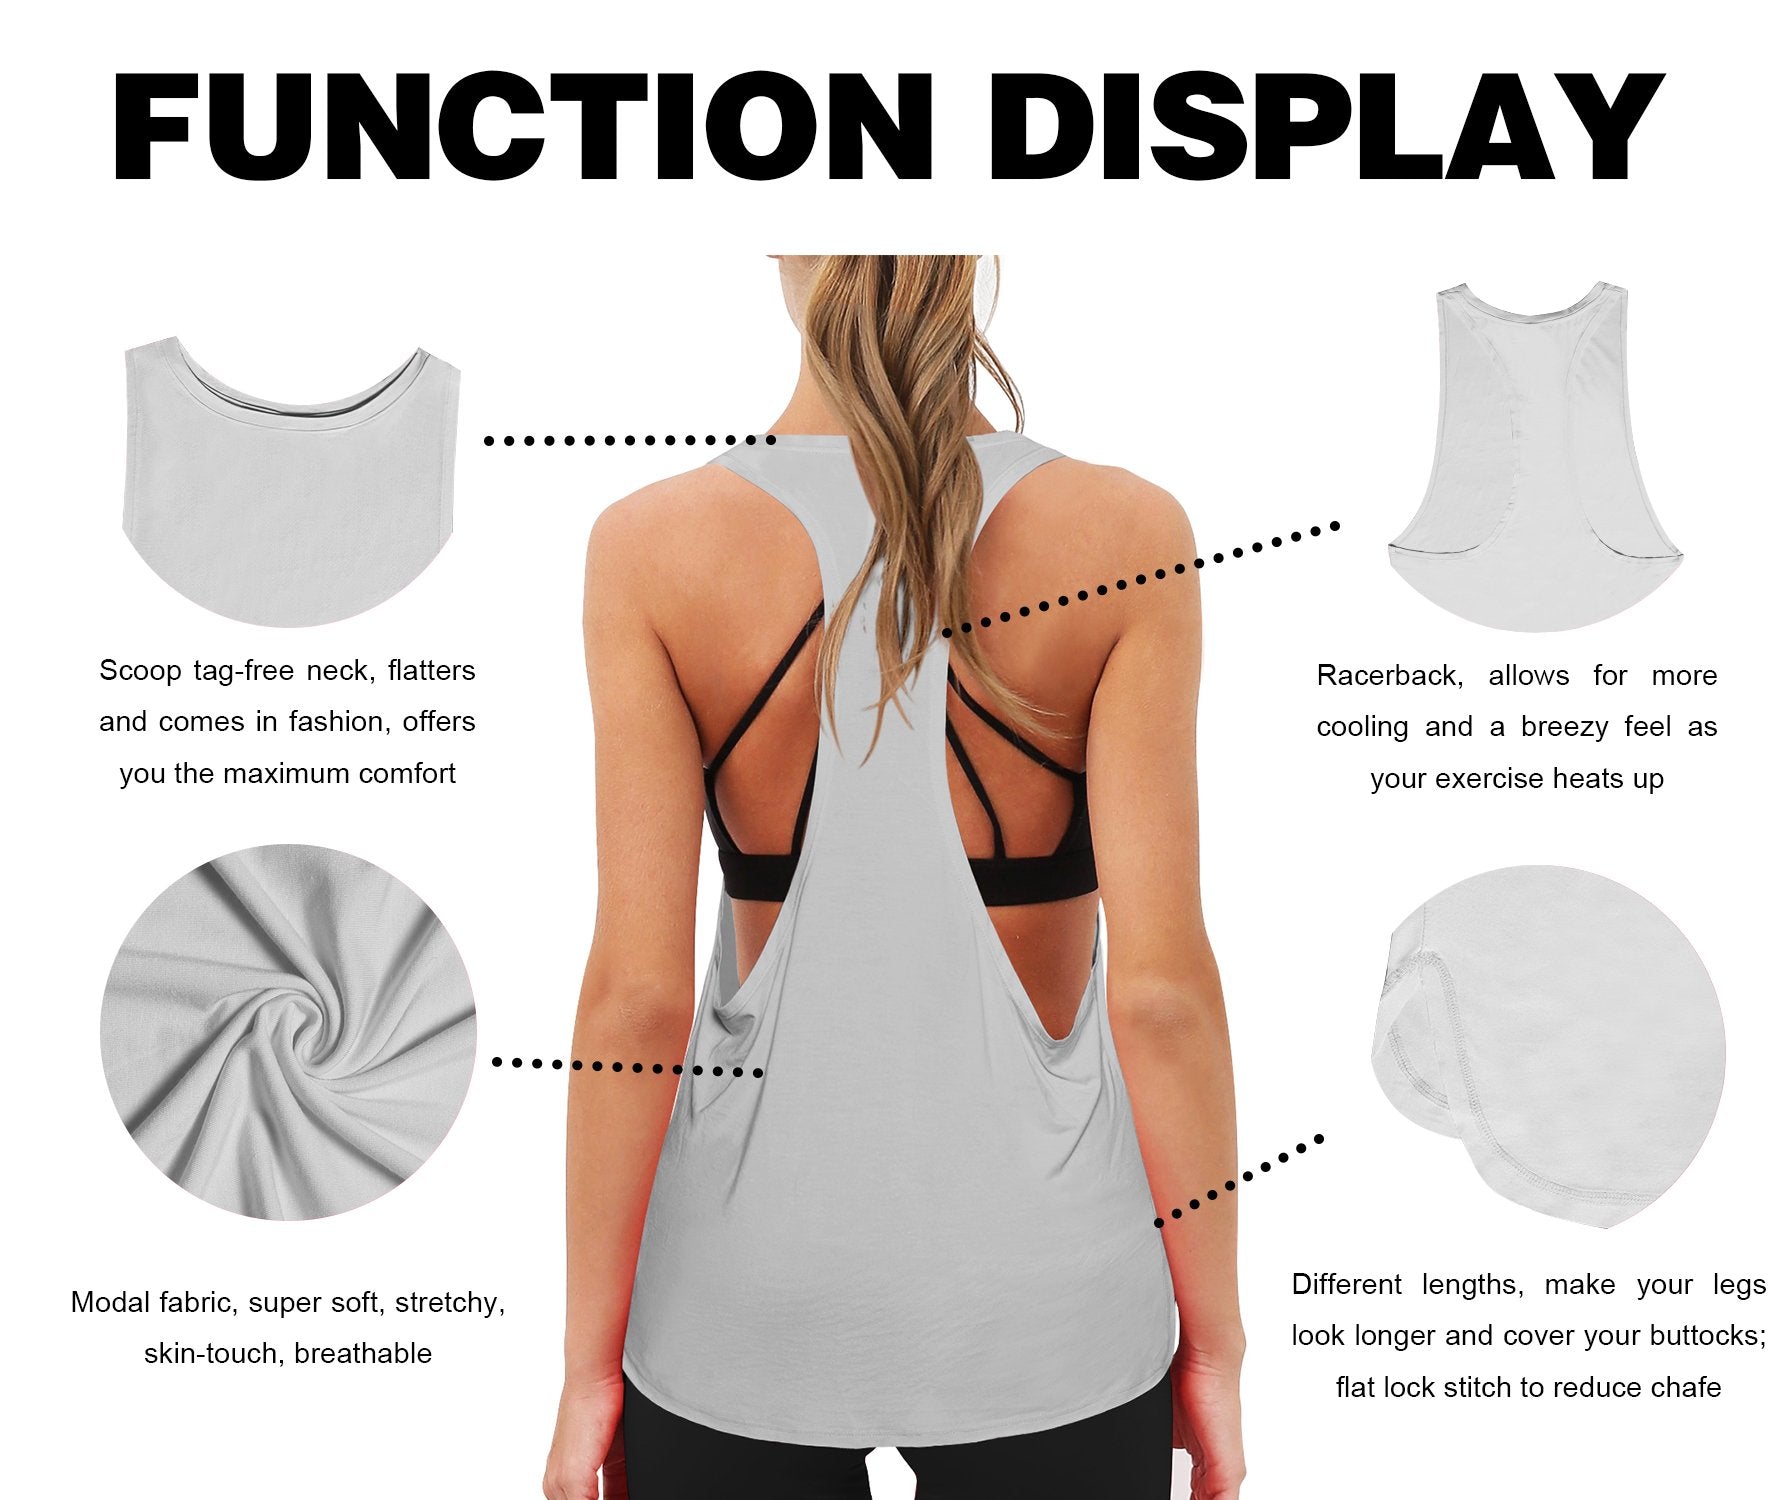 Low Cut Loose Fit Tank Top lightgray Designed for On the Move Loose fit 93%Modal/7%Spandex Four-way stretch Naturally breathable Super-Soft, Modal Fabric